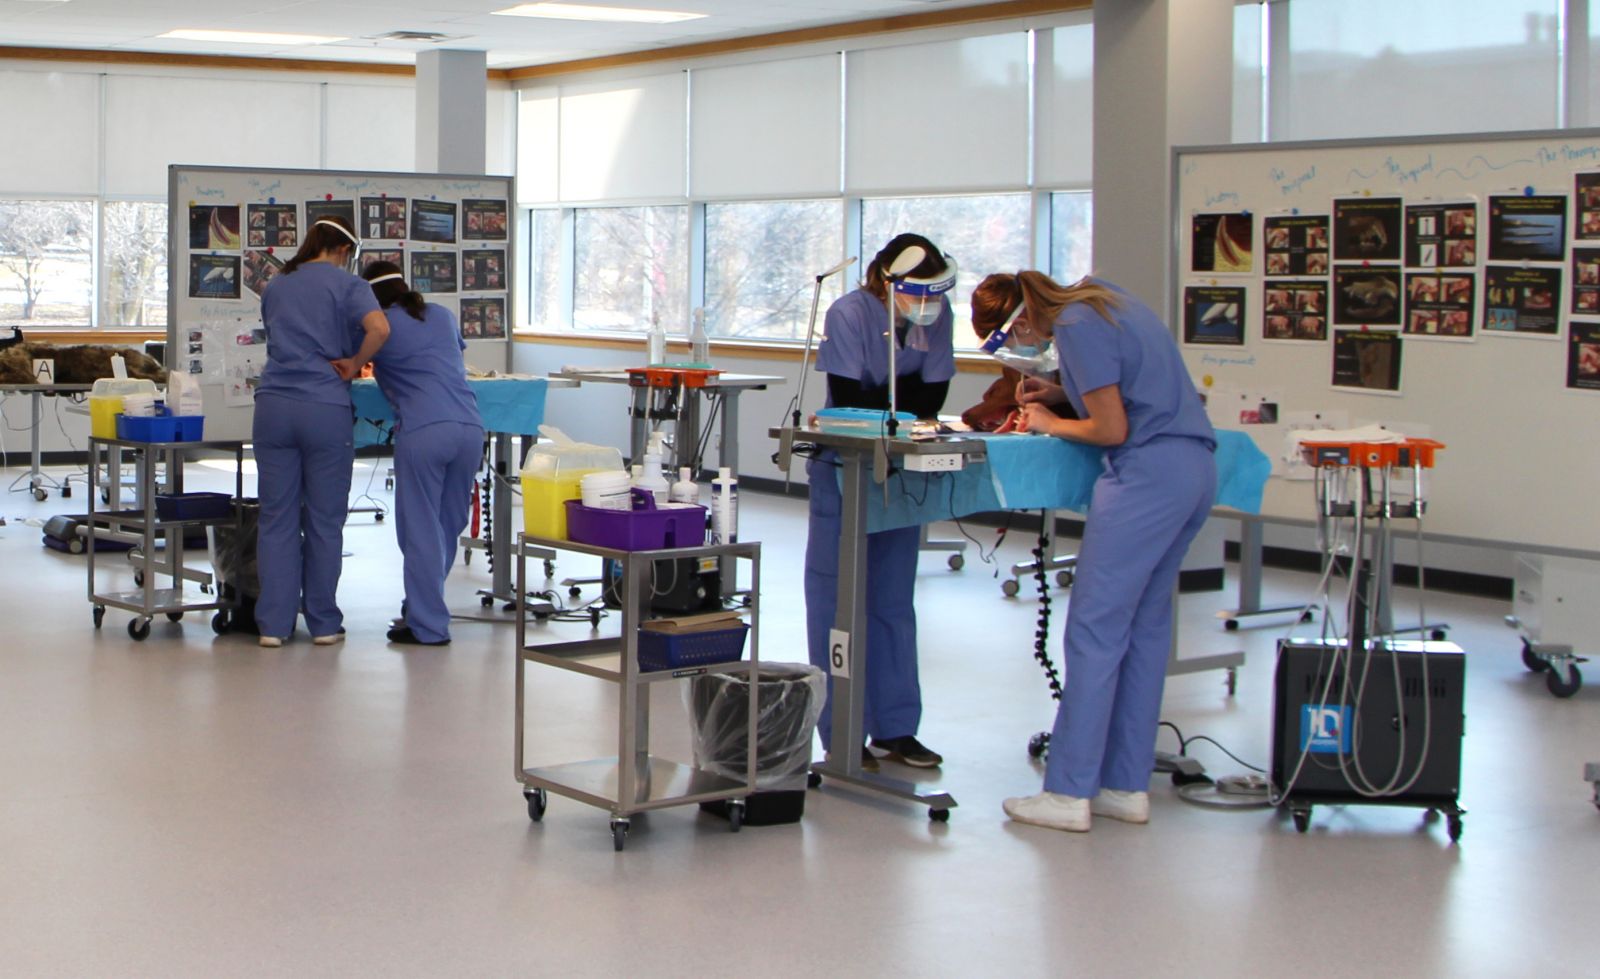 OVC student veterinarians work with high-fidelity models to learn dentistry skills